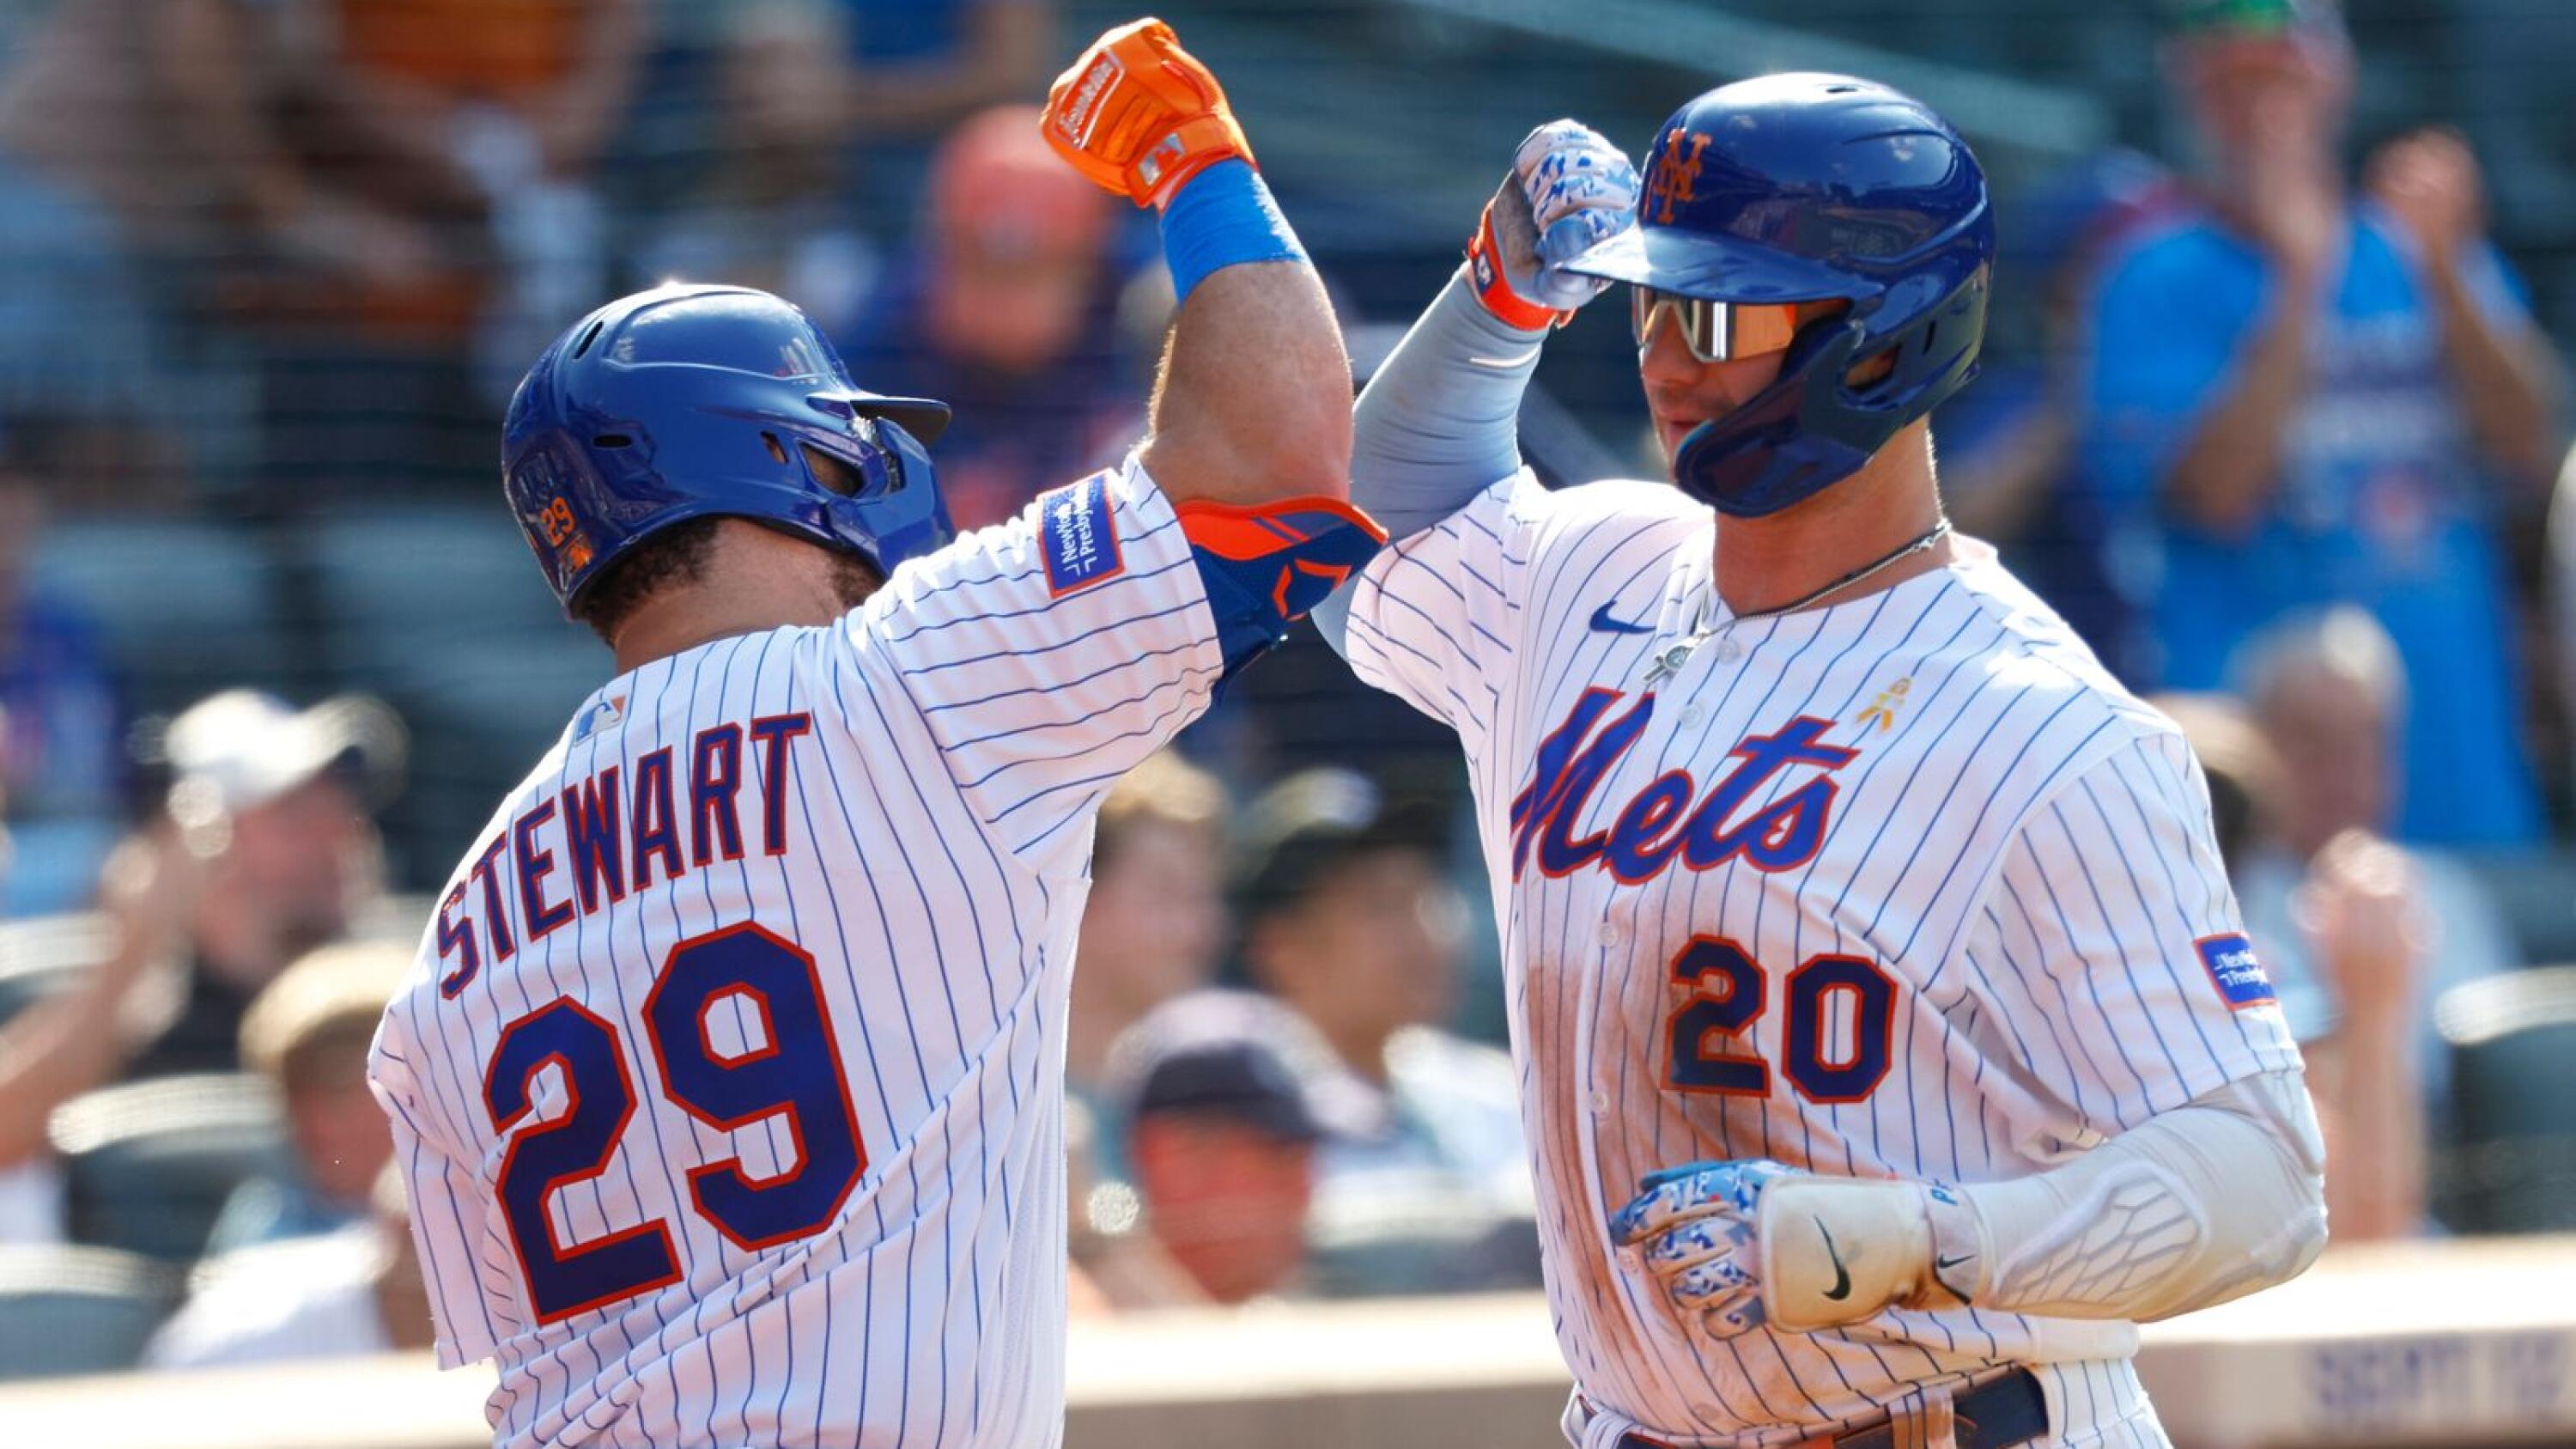 Alonso goes deep twice to reach 40 homers and 100 RBIs as Mets beat  Mariners 6-3